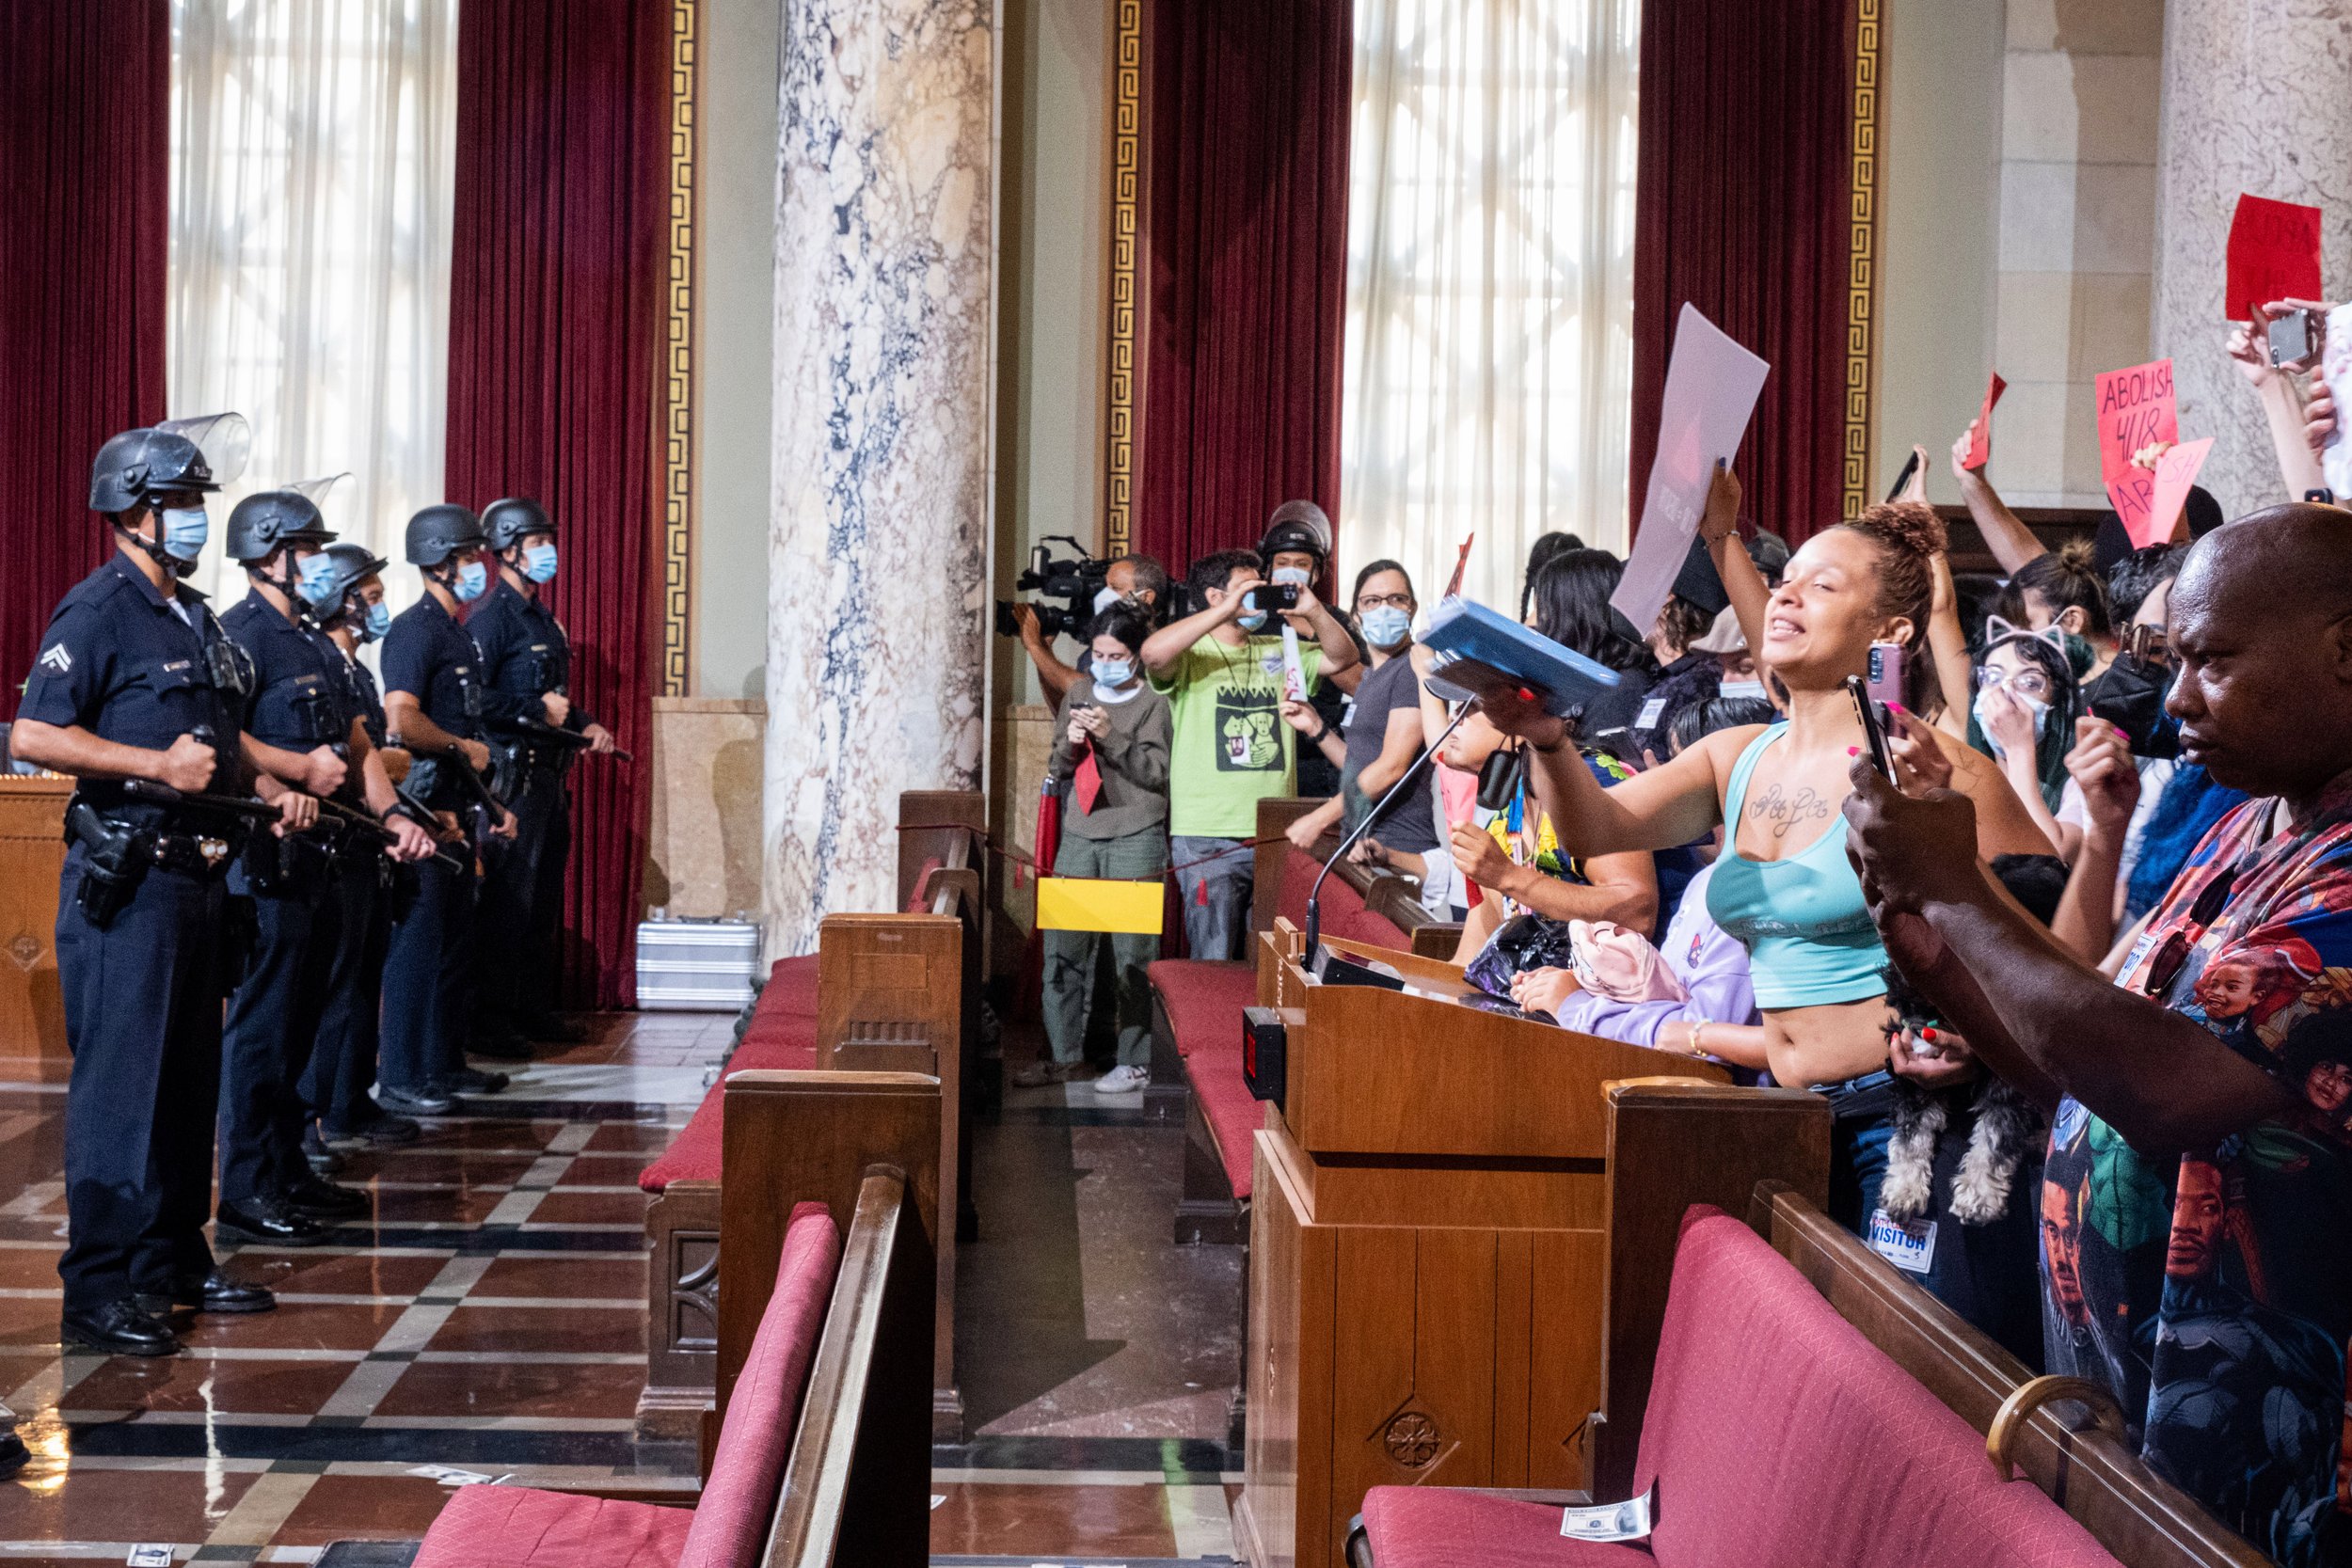  Los Angeles community members and activists voice their frustration after Ricci Sergirnko and Ms. Italy were detained, ending the official public hearing. Los Angeles City Hall on August 9, 2022. (Anna Sophia Moltke | The Corsair) 